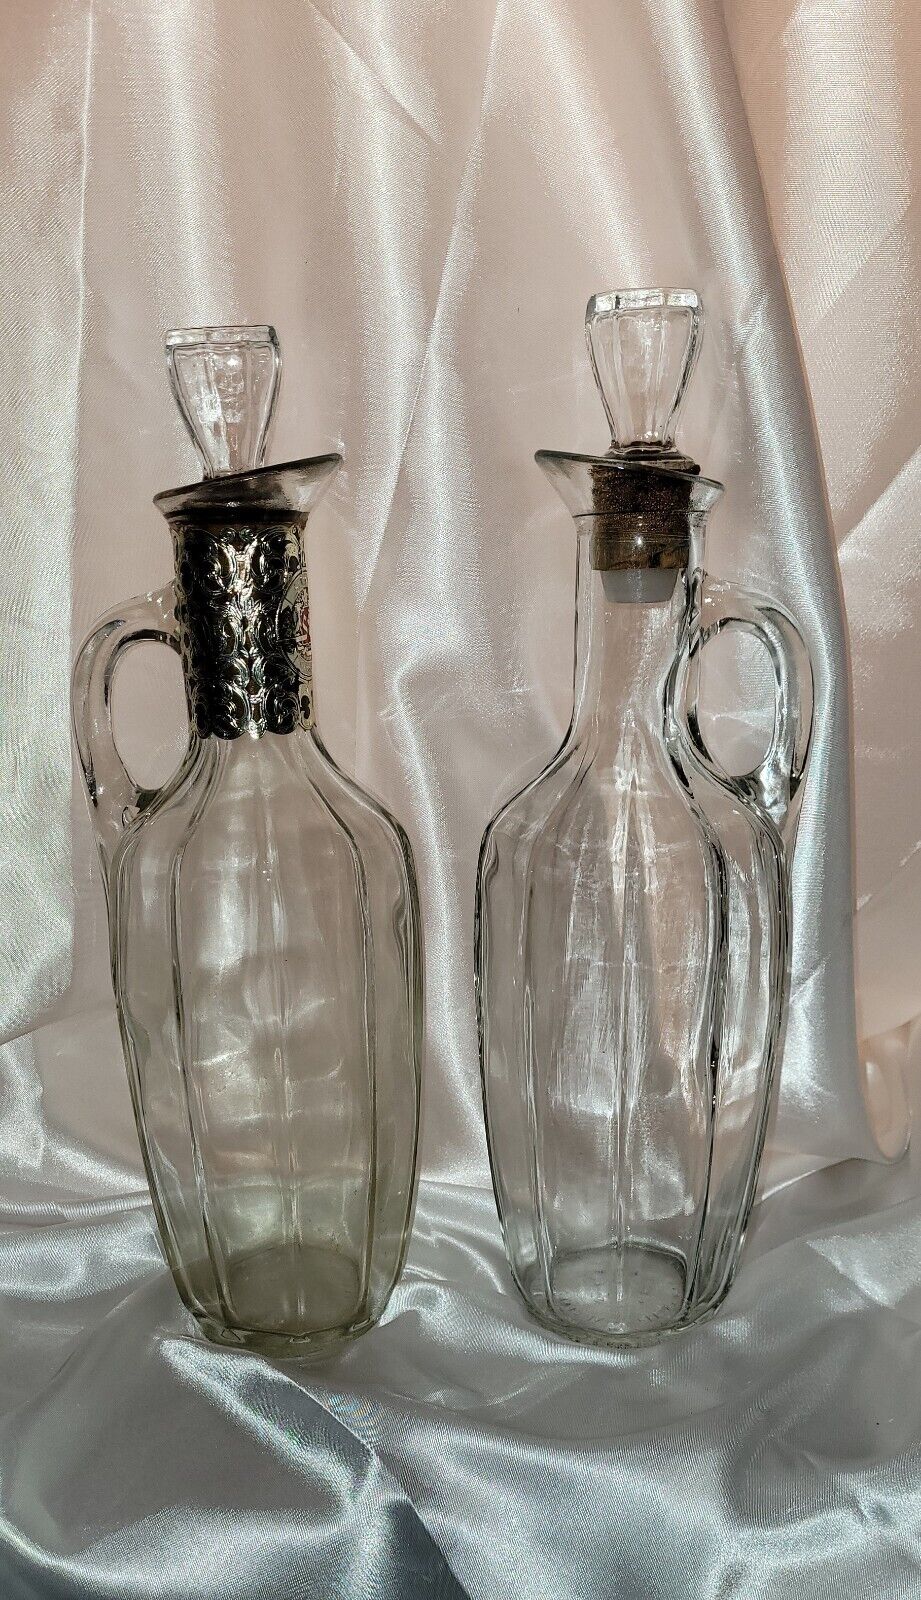 2 Vintage Schenley Decanters Labled Bottle Top Won't Come Off Used